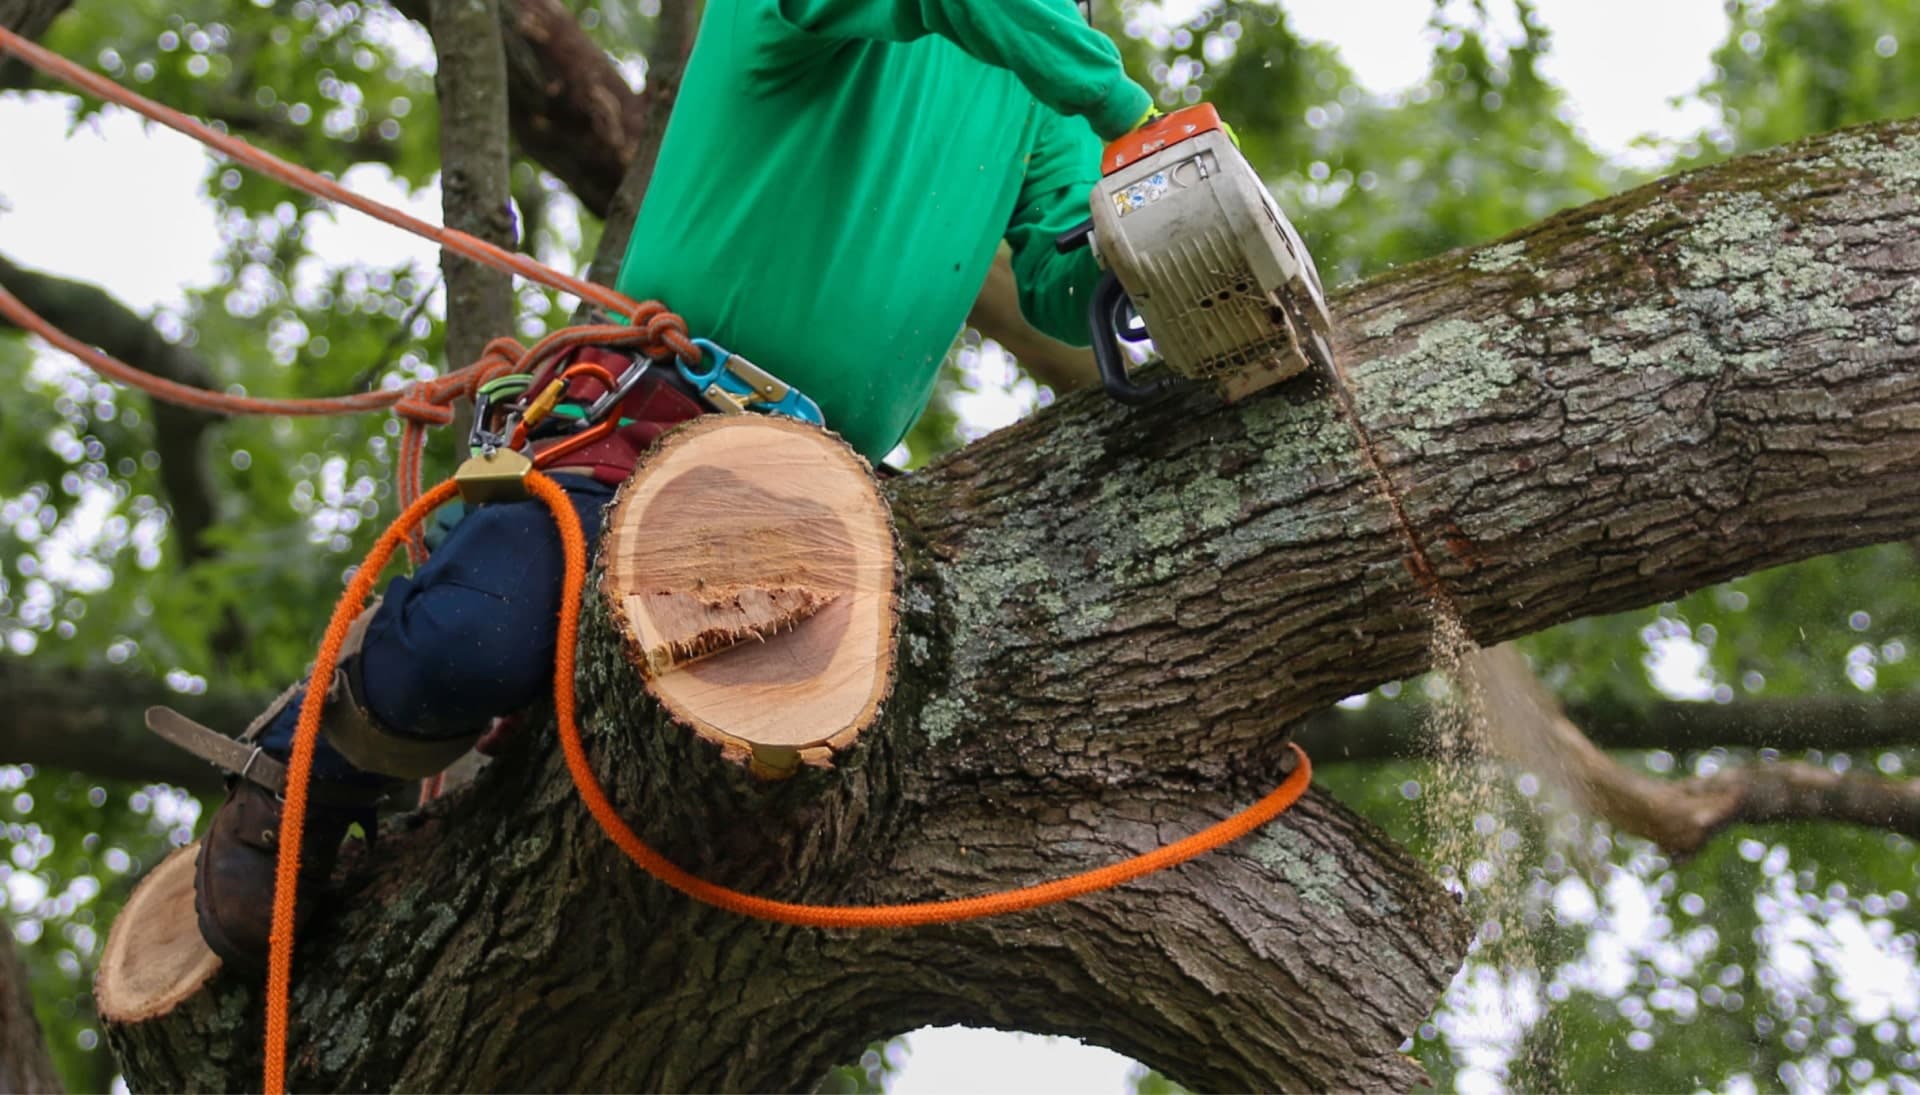 Shed your worries away with best tree removal in Gardendale